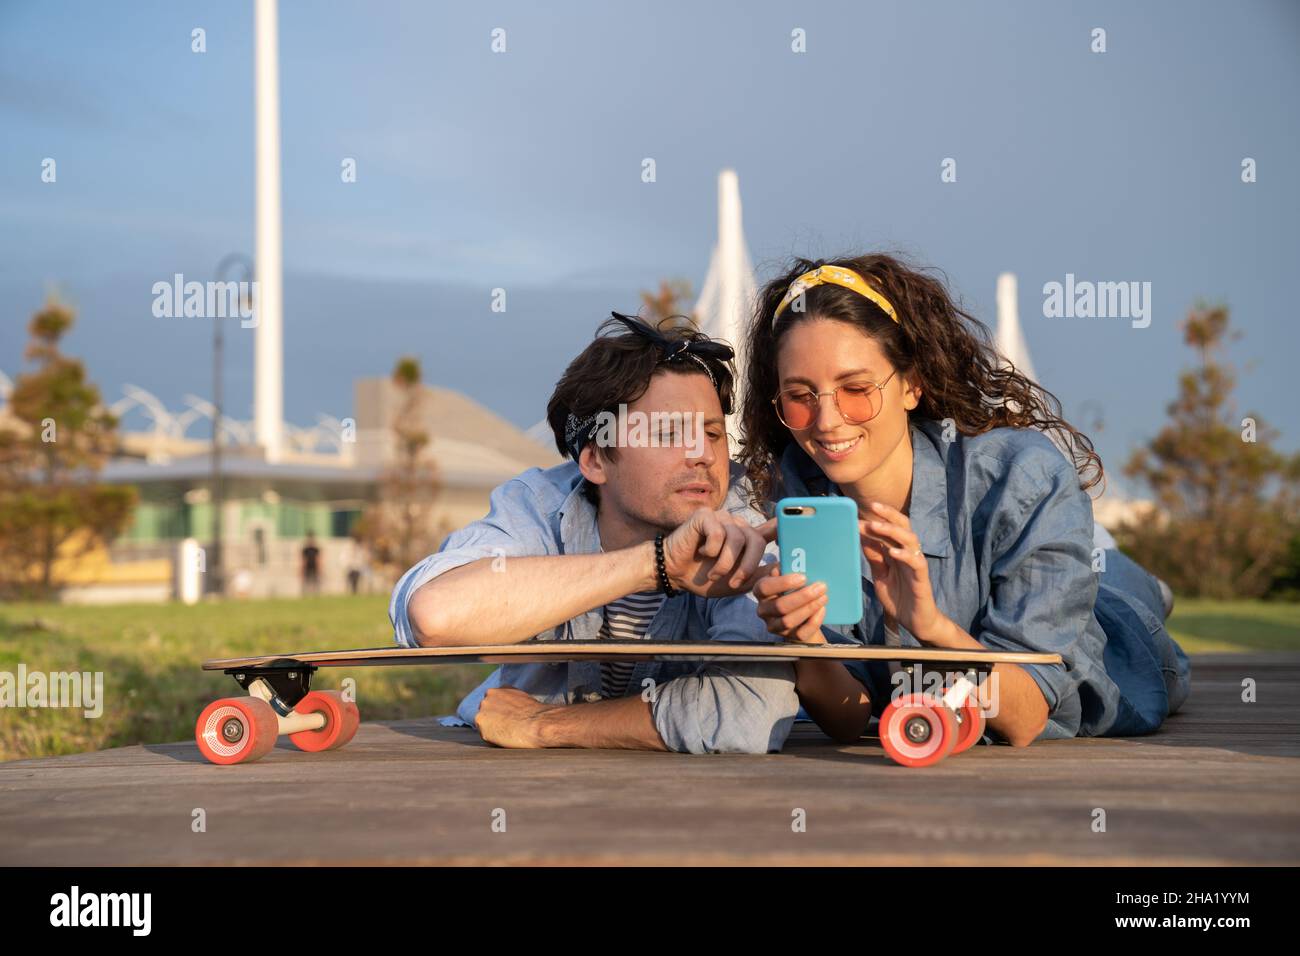 Happy smiling woman show man message on smartphone lying on skateboard outdoor in summer urban park Stock Photo